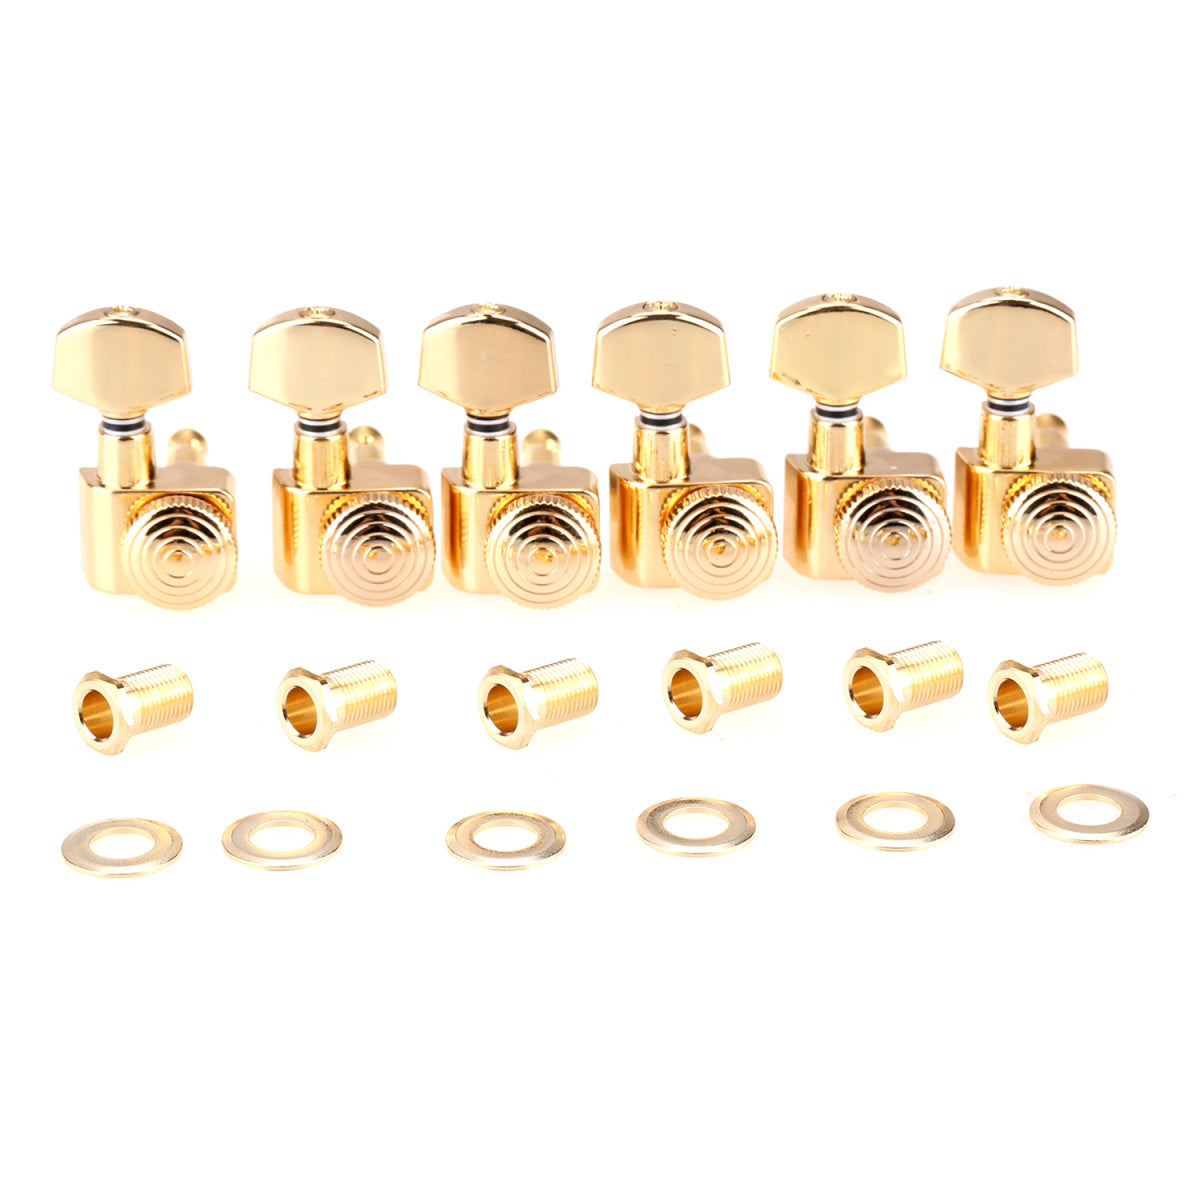 Musiclily Pro 6-in-line 2-pins Full Metal Guitar Locking Tuners Machine Heads Tuning Pegs Keys Set for Fender Strat/Tele, Gold